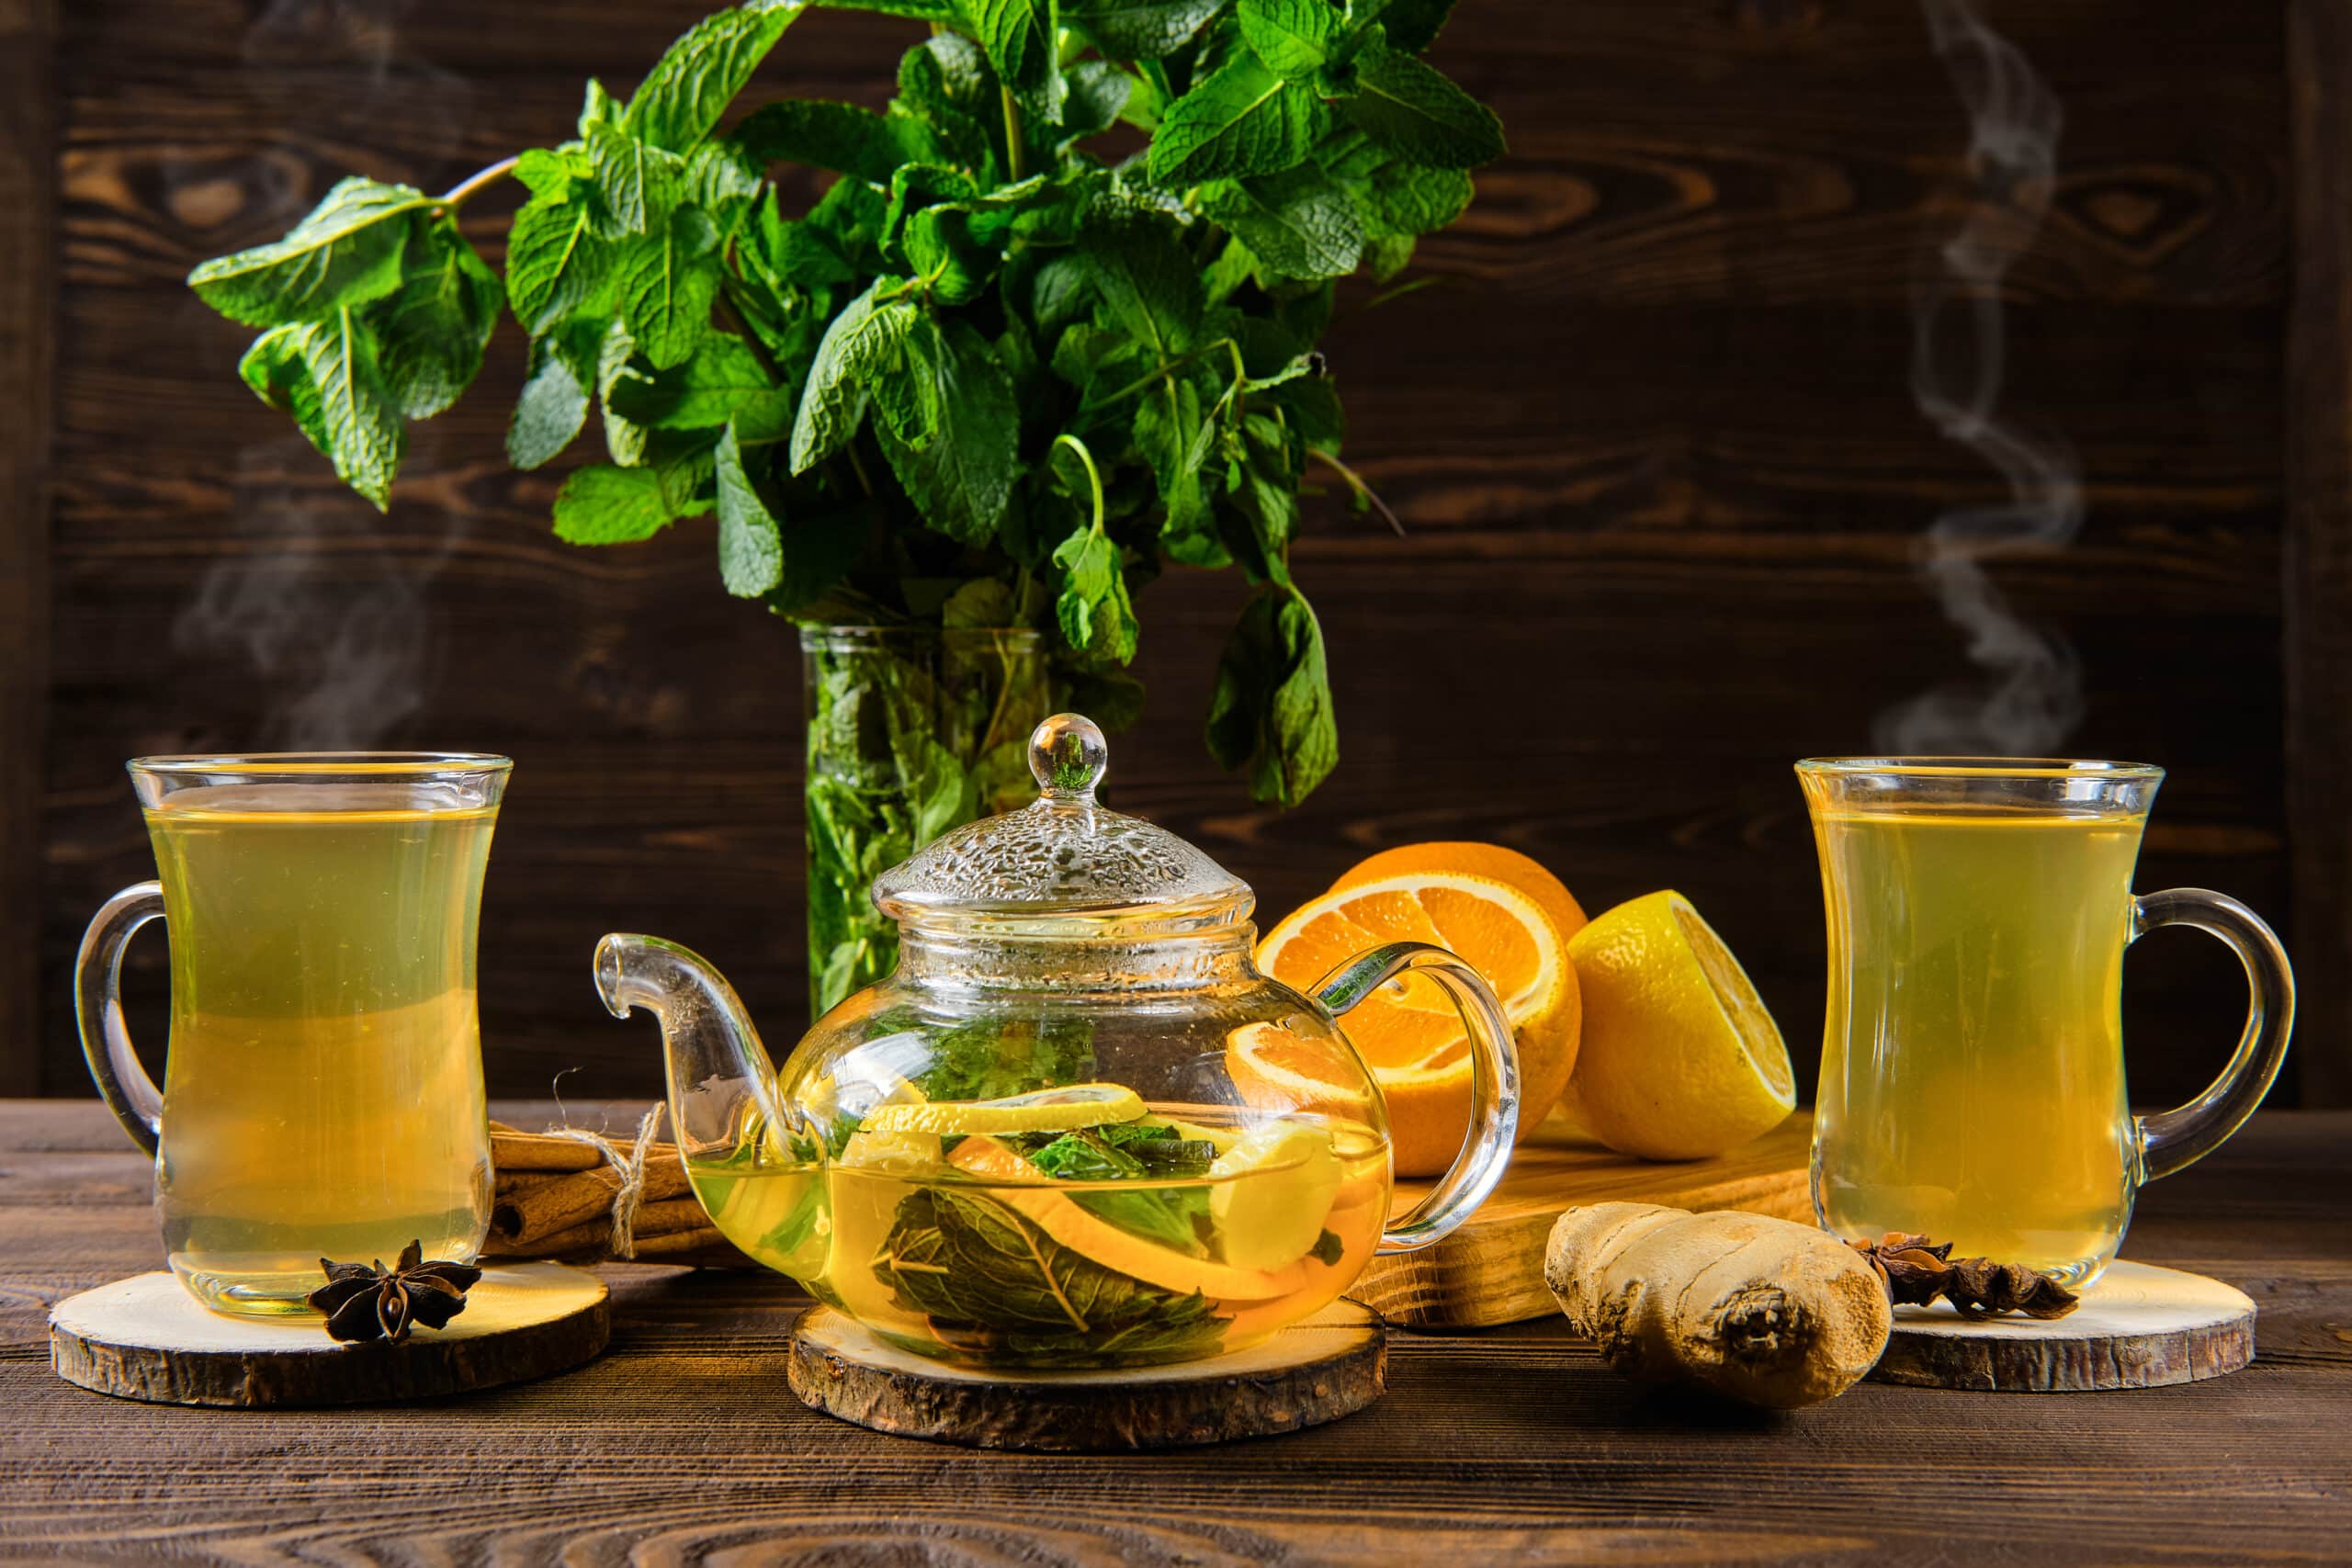 Hot tea with lemon, orange, ginger and mint on wooden table in the morning